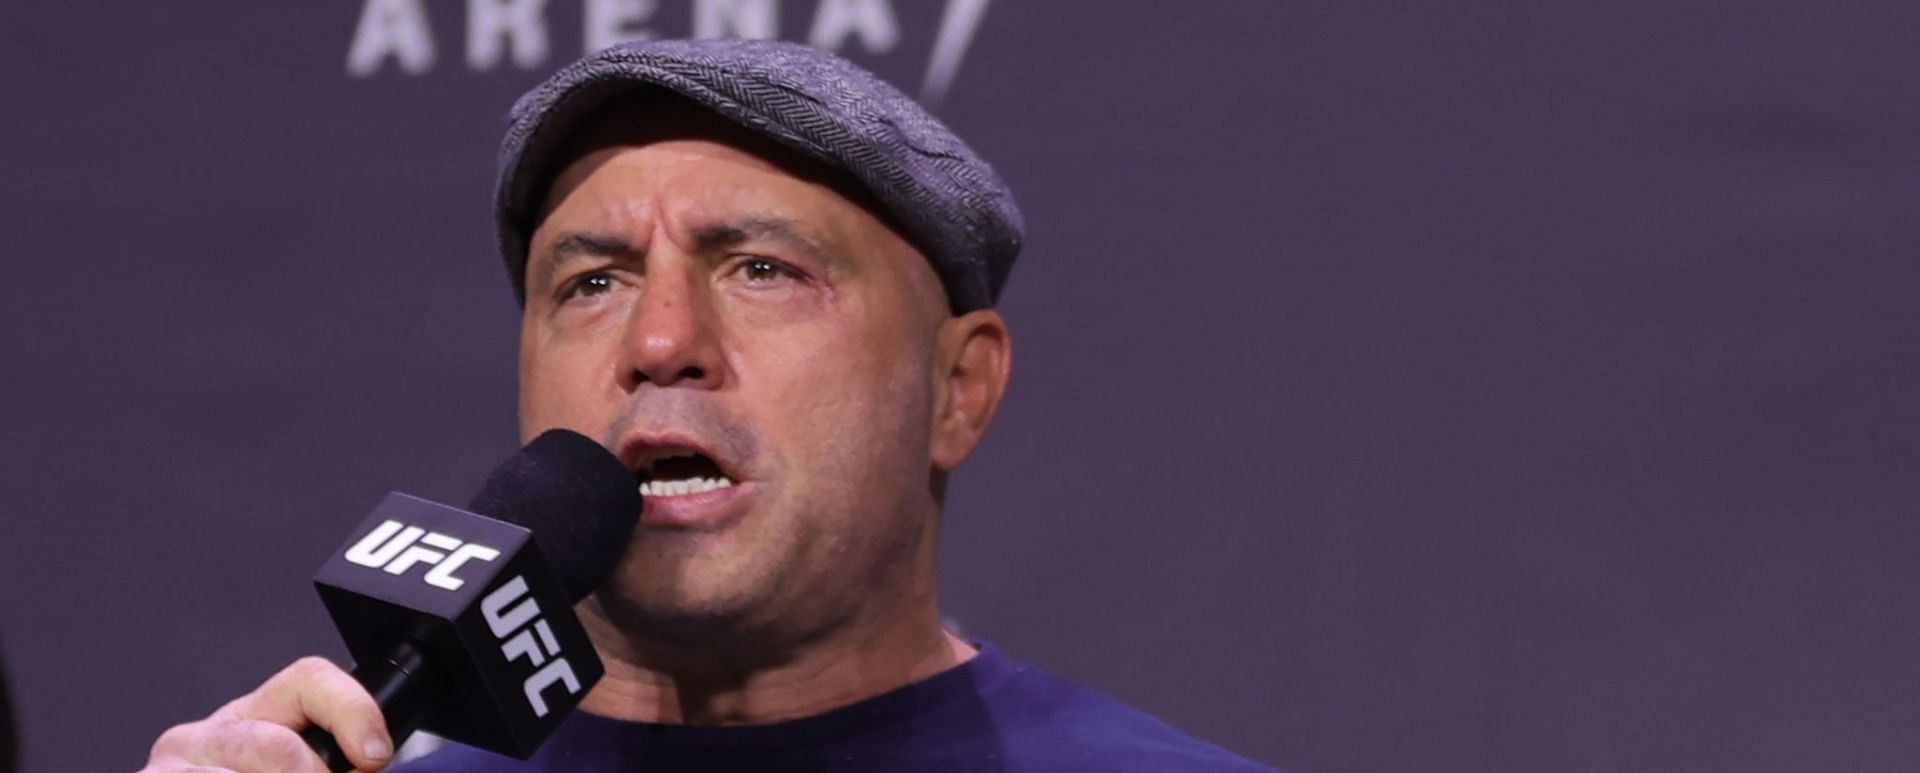 Joe Rogan has found himself in the middle of trouble since his COVID misinformation controversy came to light (Image via Carmen Mandato/Getty Images)